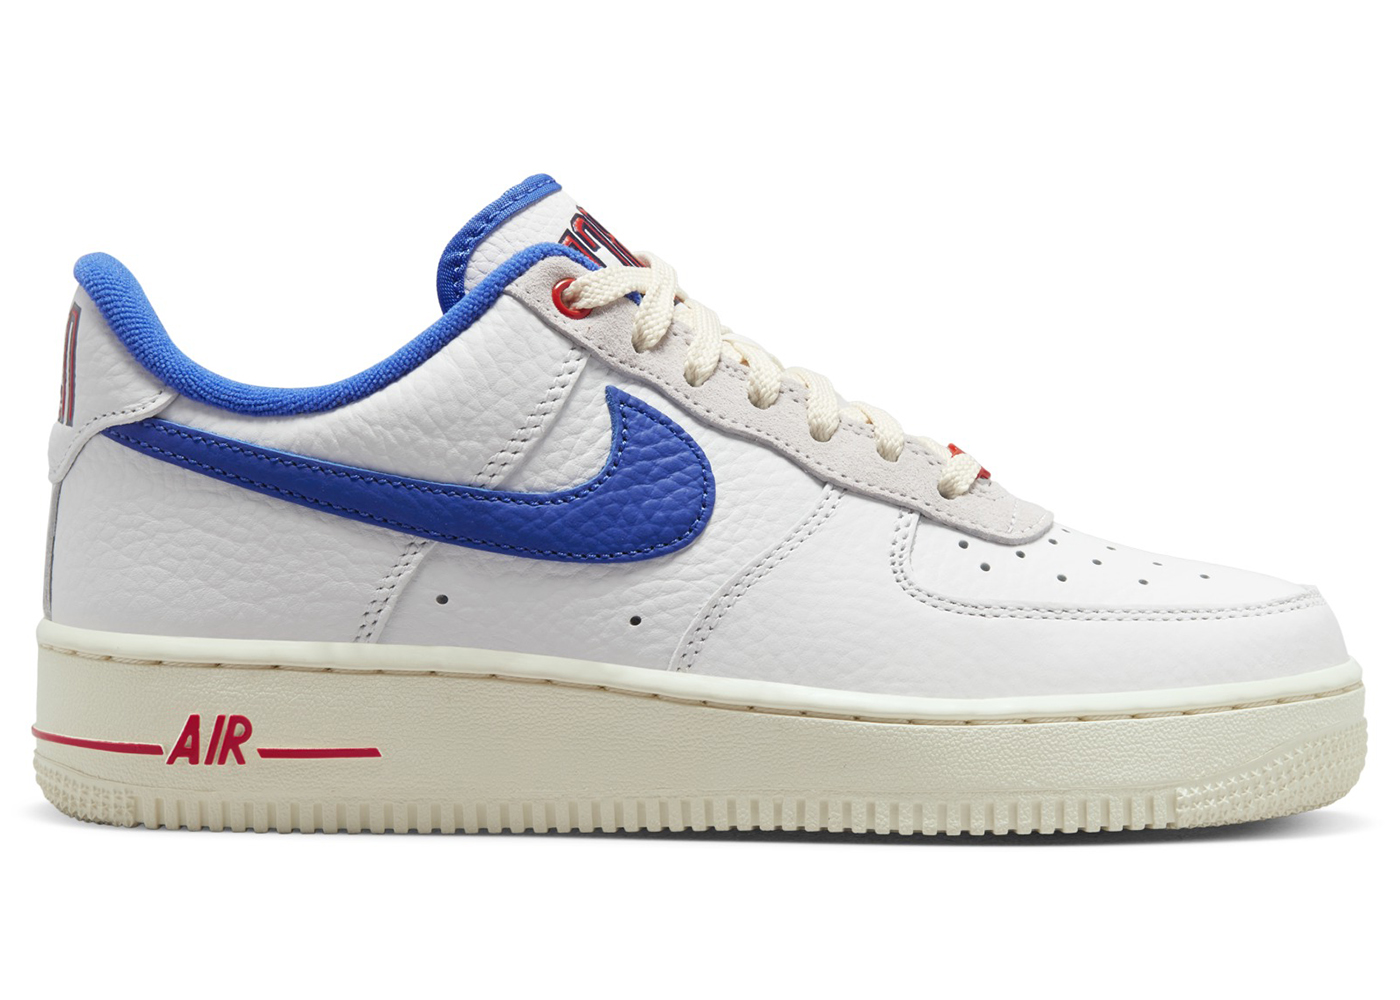 Nike Air Force 1 Low '07 LX Command Force University Blue Summit White  (Women's)